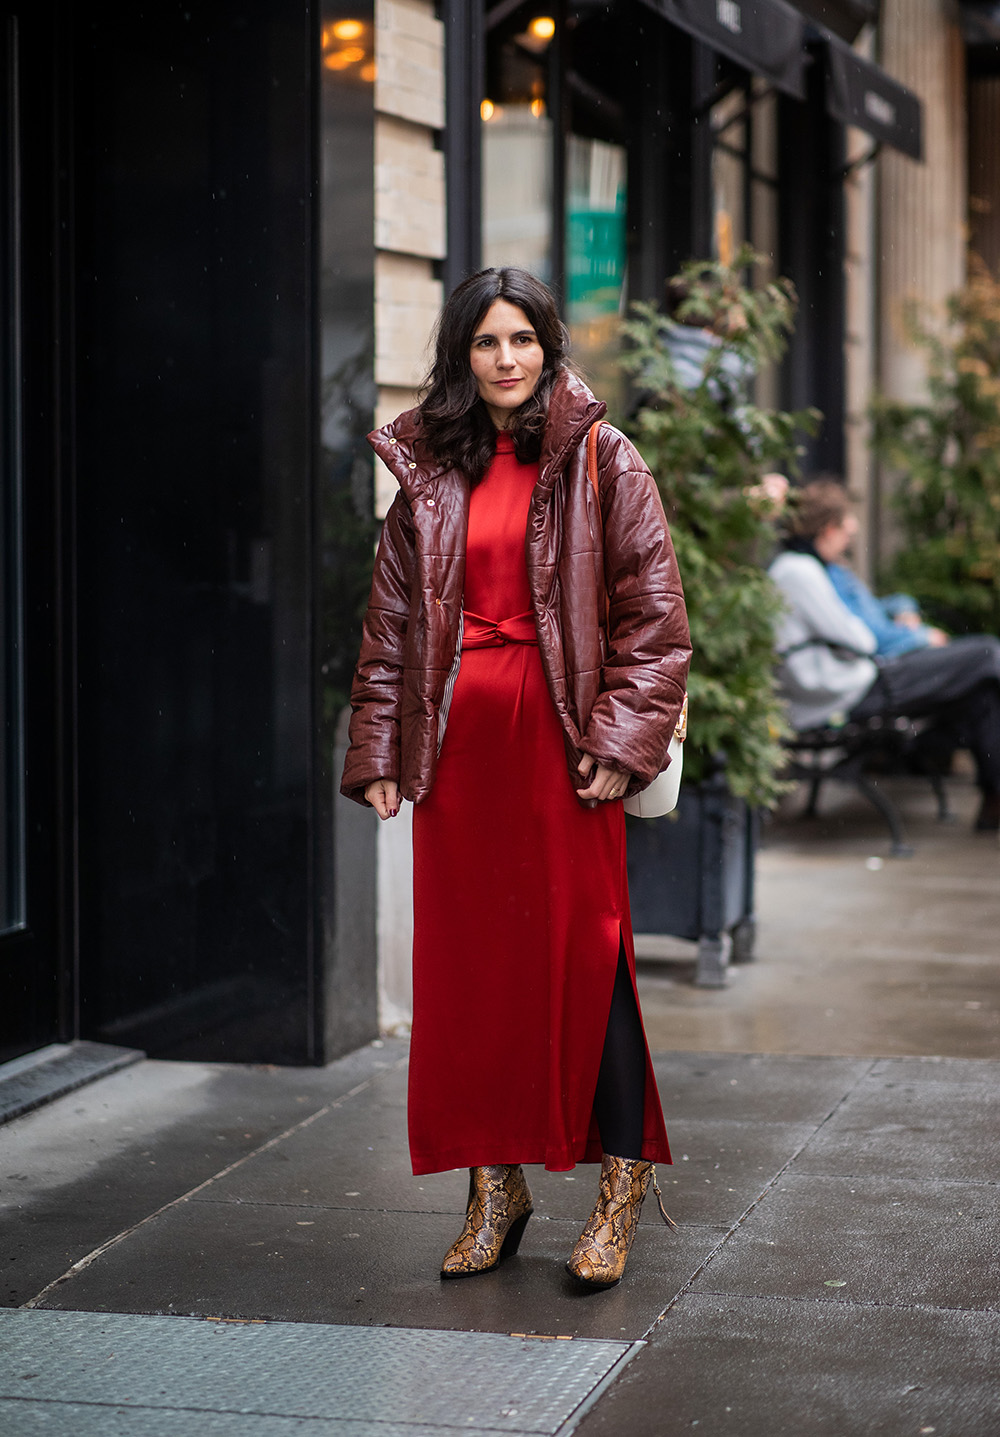 NEW YORK, NEW YORK - FEBRUARY 08: A guest wearing red dress, puffer jacket outside Nanushka during New York Fashion Week Autumn Winter 2019 on February 08, 2019 in New York City. (Photo by Christian Vierig/Getty Images)